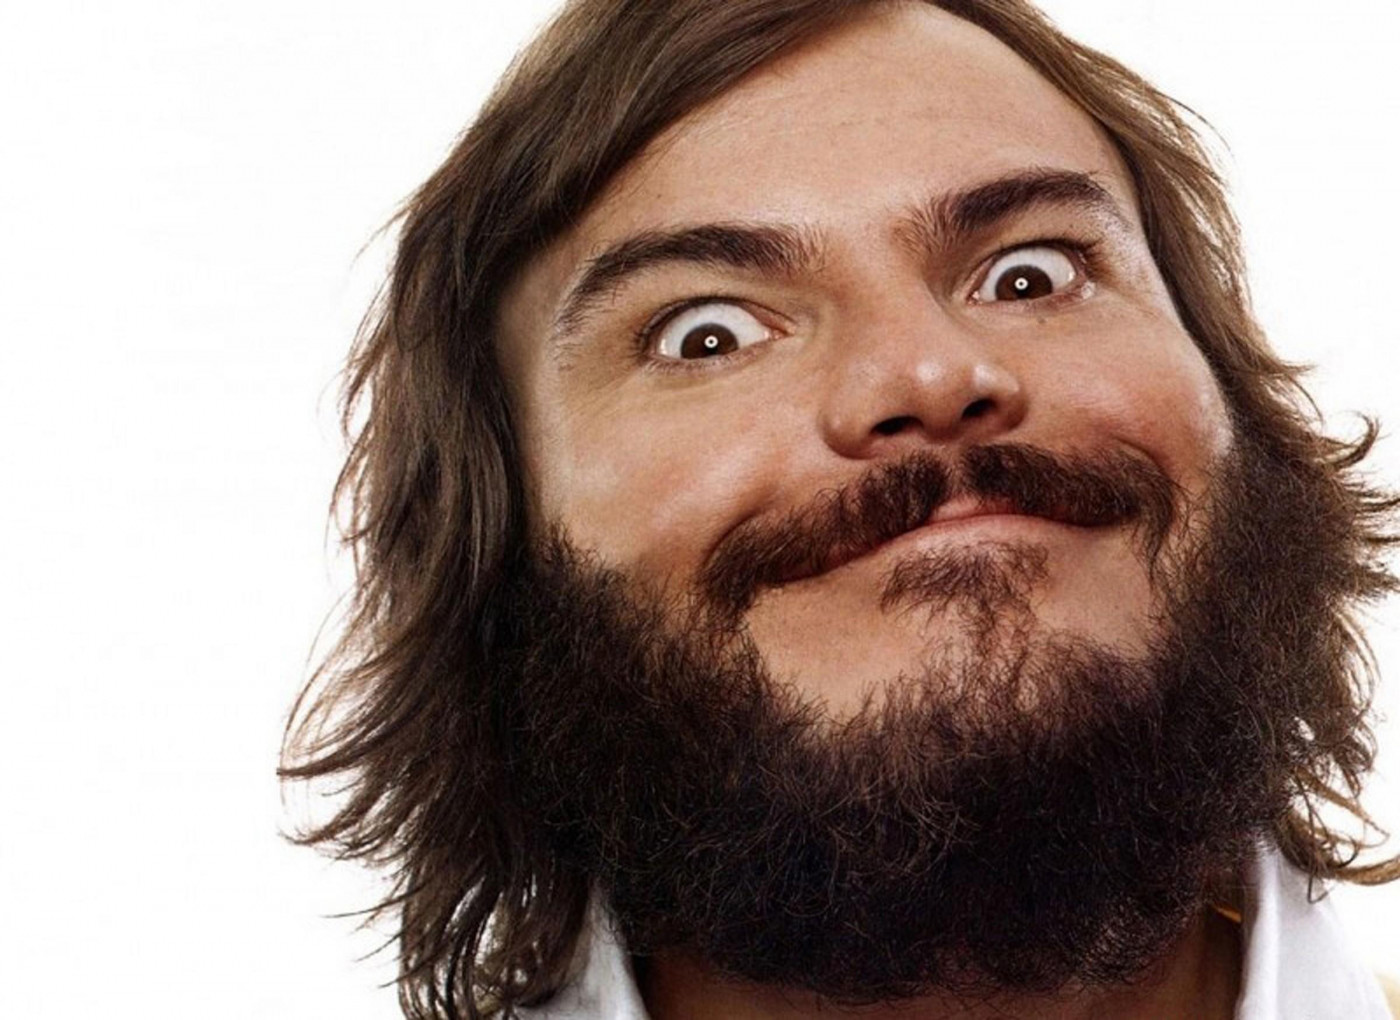 The 11 Best Jack Black Movies of All Time - IGN